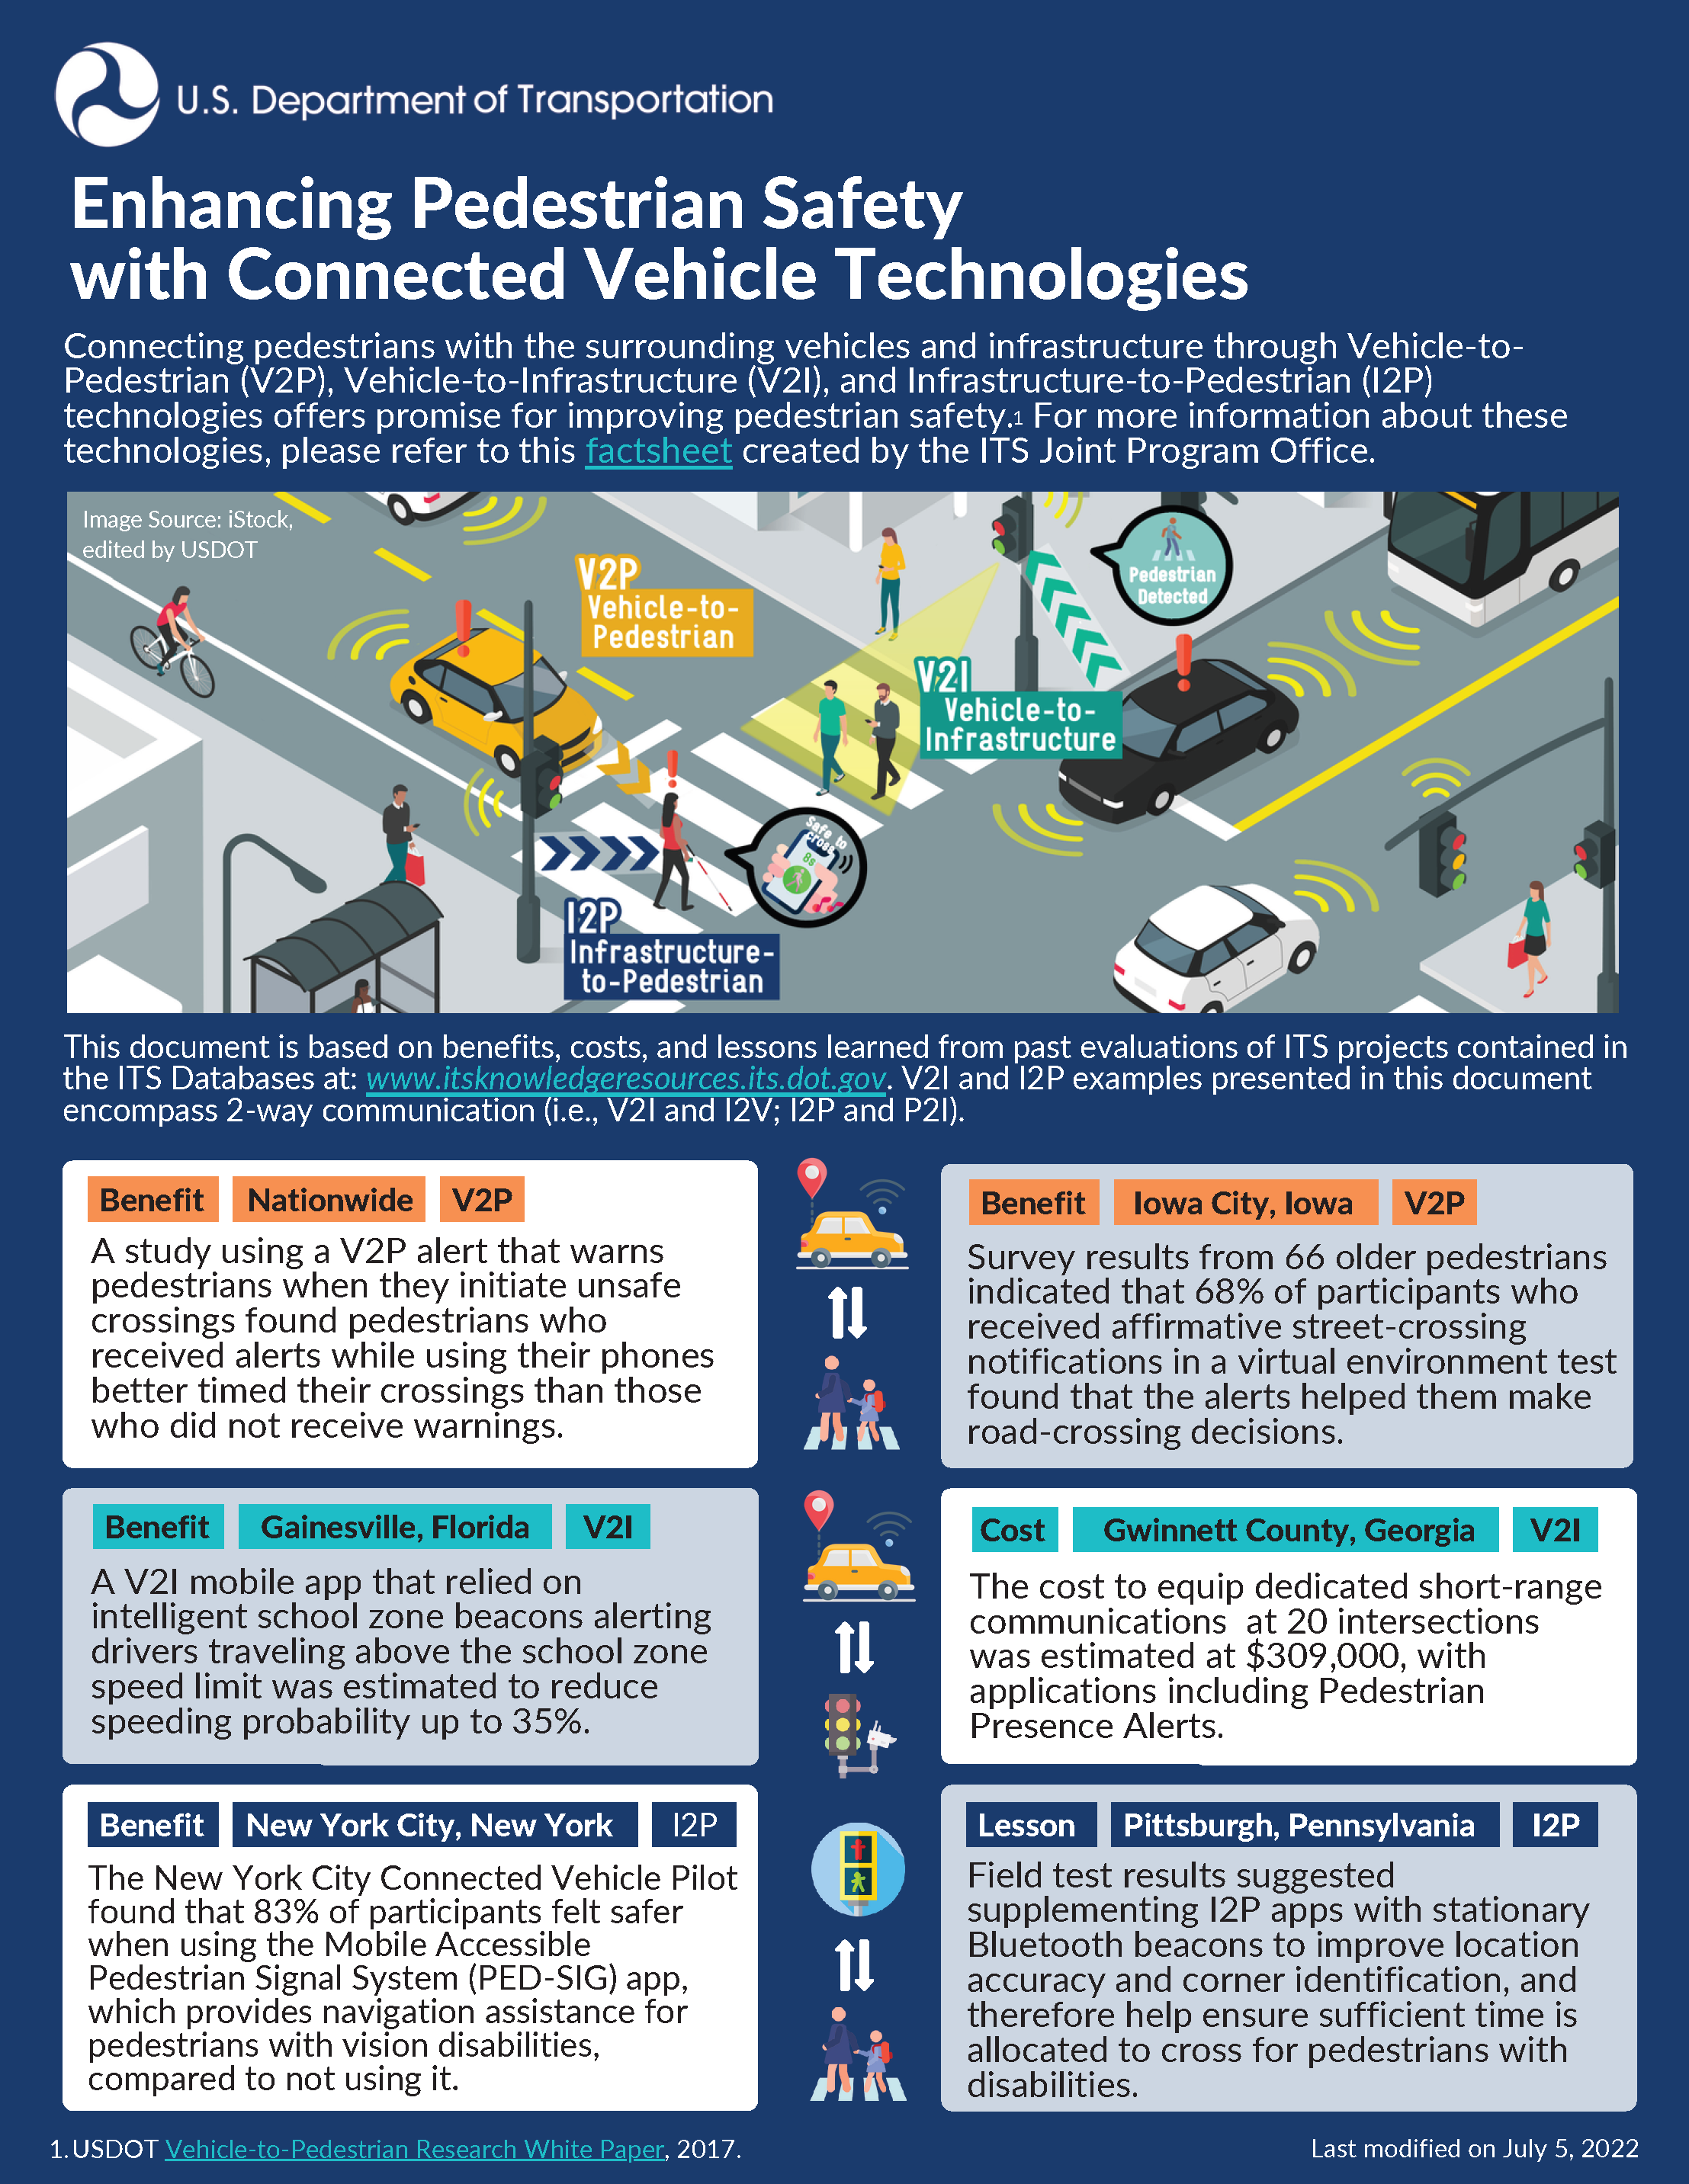 Infographic depicting how connecting pedestrians with surrounding vehicles and infrastructure through Vehicle-to-Pedestrian (V2P), Vehicle-to-Infrastructure (V2I), and Infrastructure-to-Pedestrian (I2P) technologies offers promise for improving pedestrian safety.